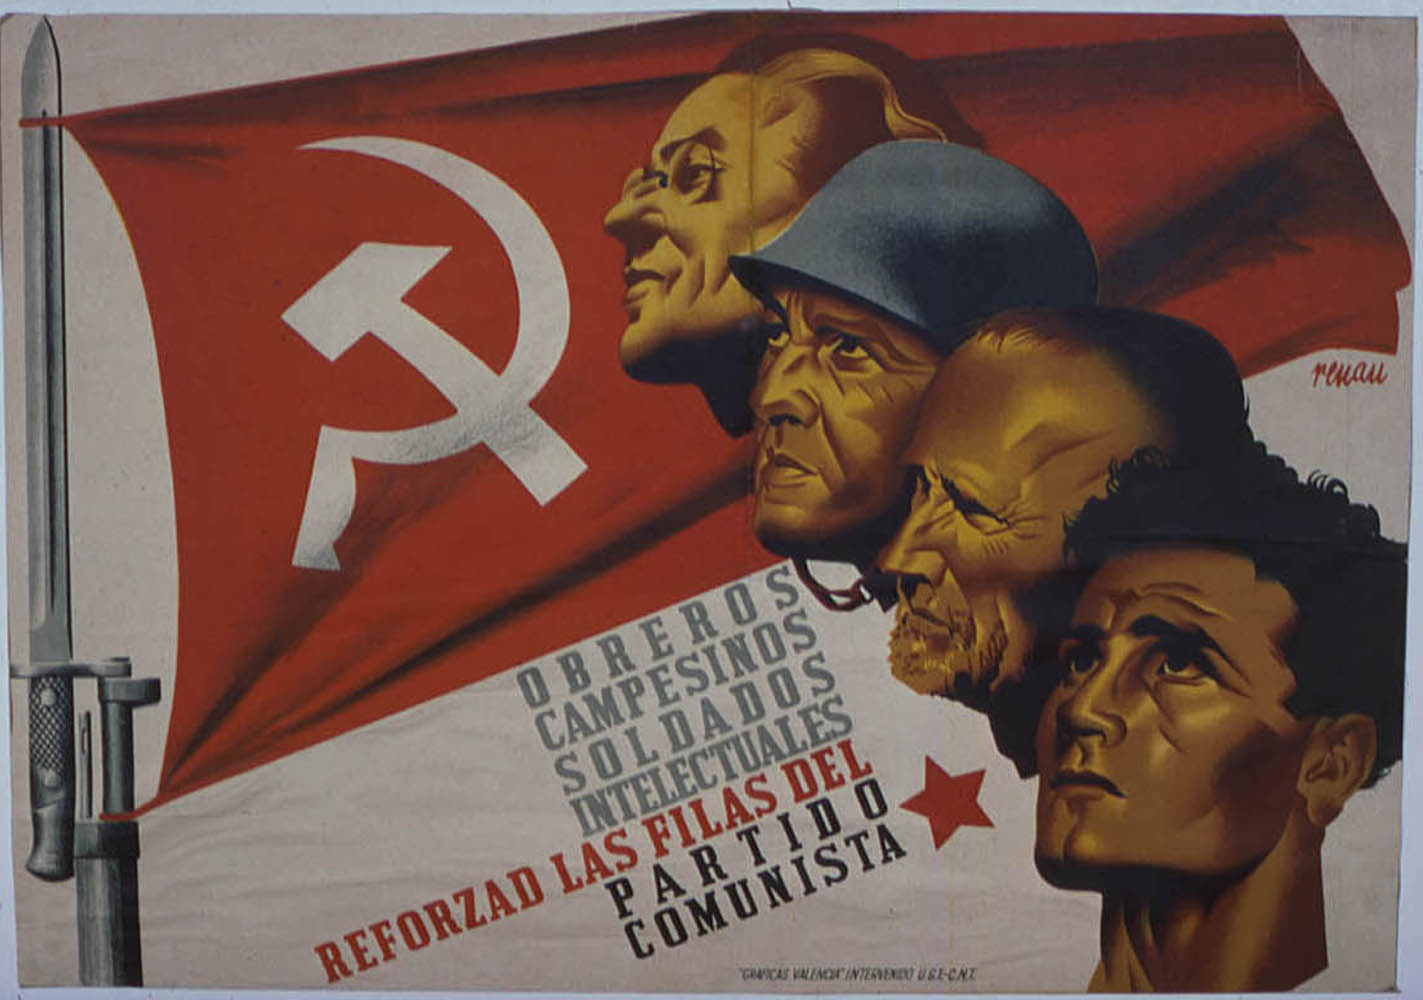 Poster with 4 men and the communist flag in background. Text reads: Obreros, Campesinos, soldados, intelluales. Reforzad Las Filas  del Partido Comunista. and a red star.